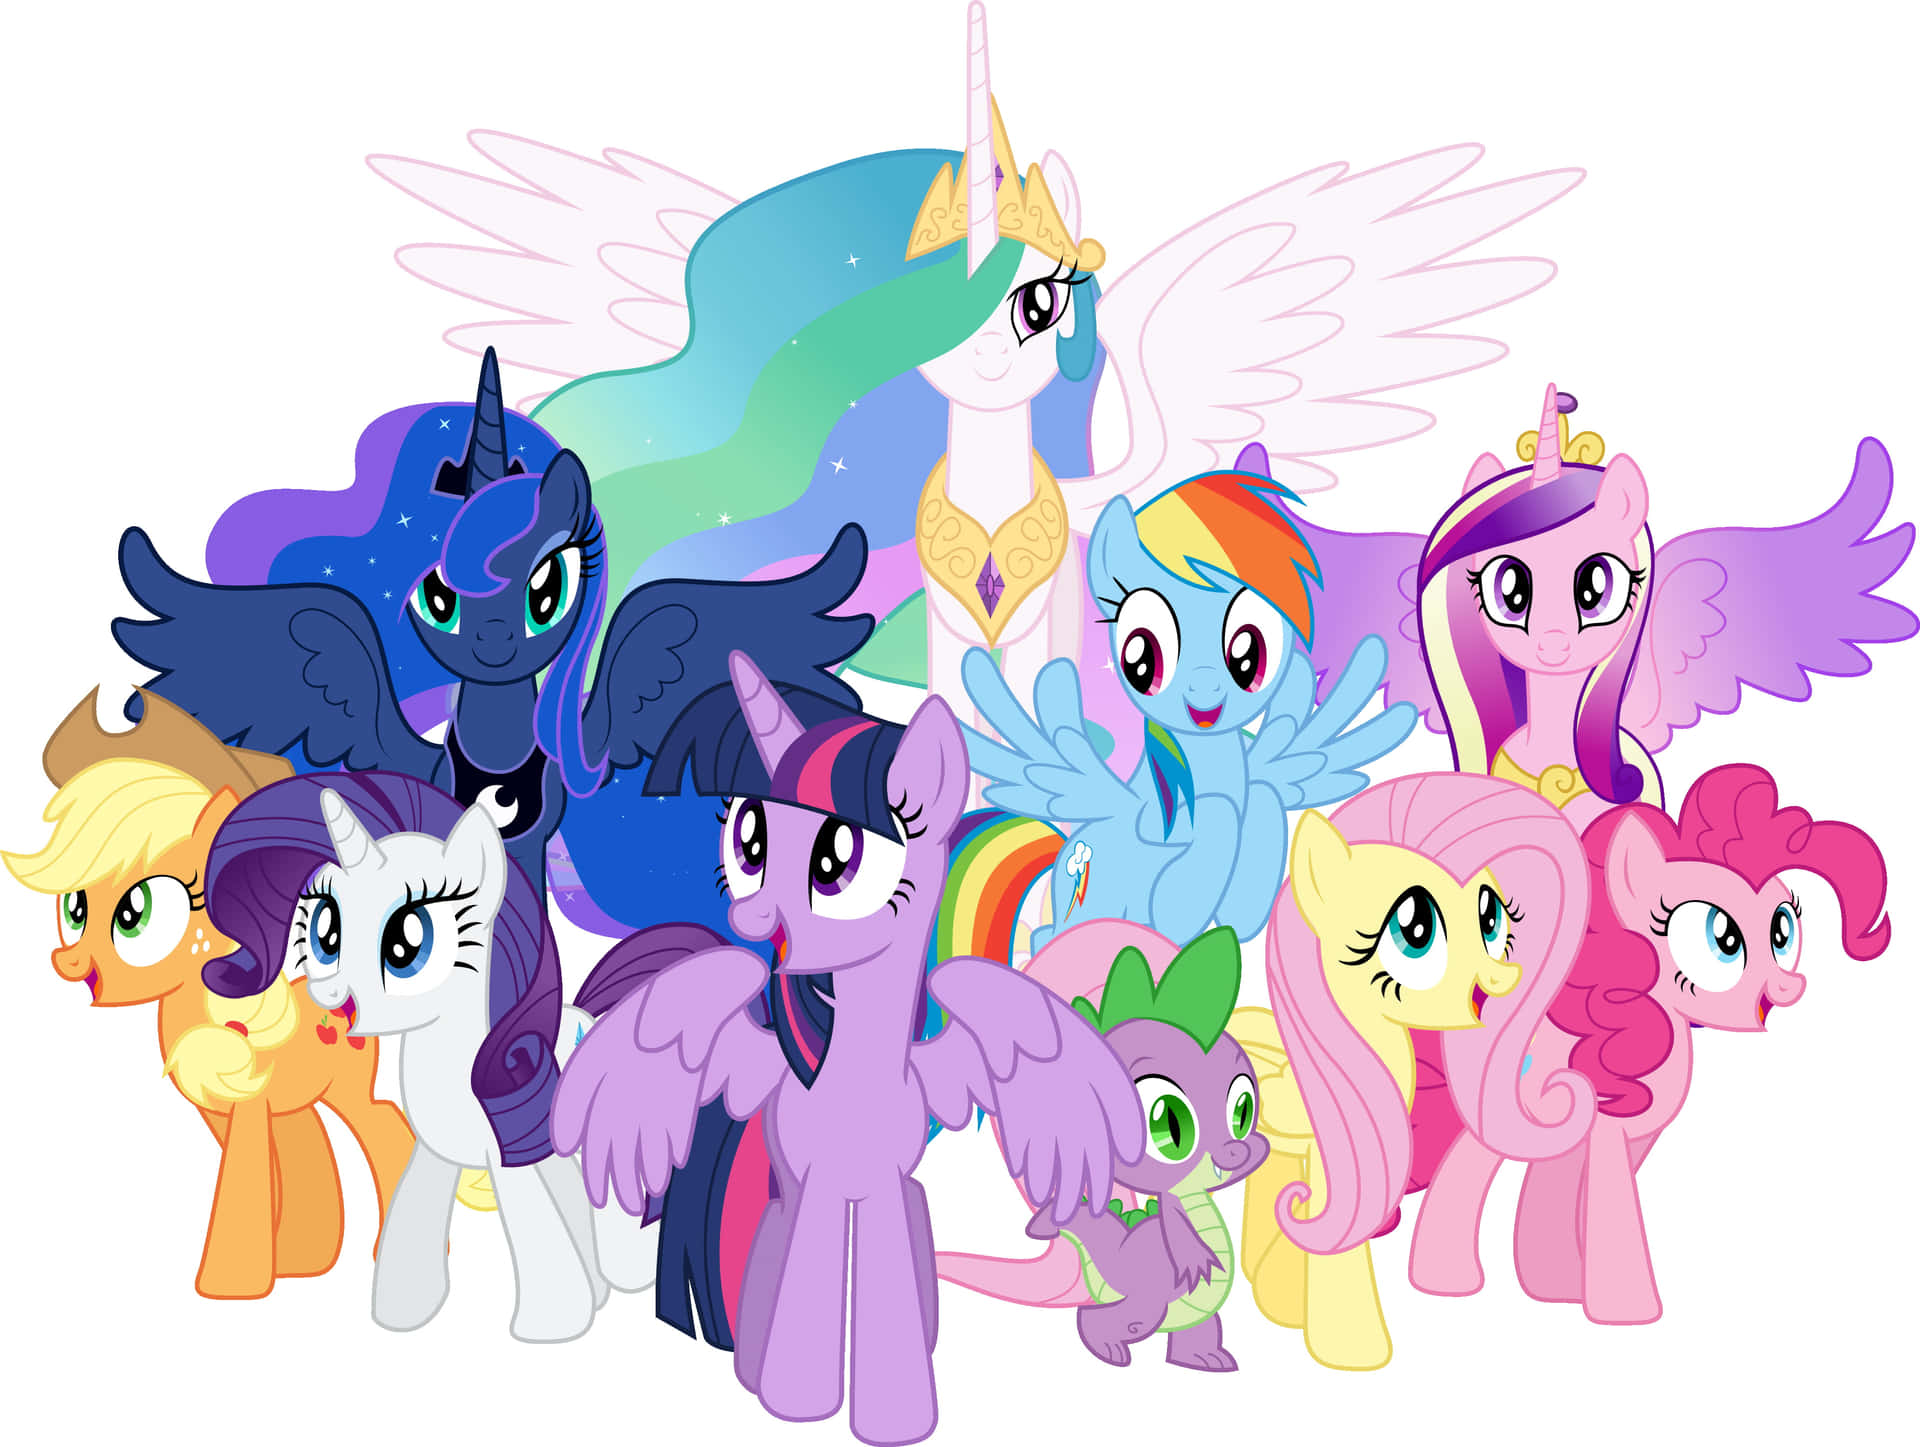 A magical adventure awaits with My Little Pony